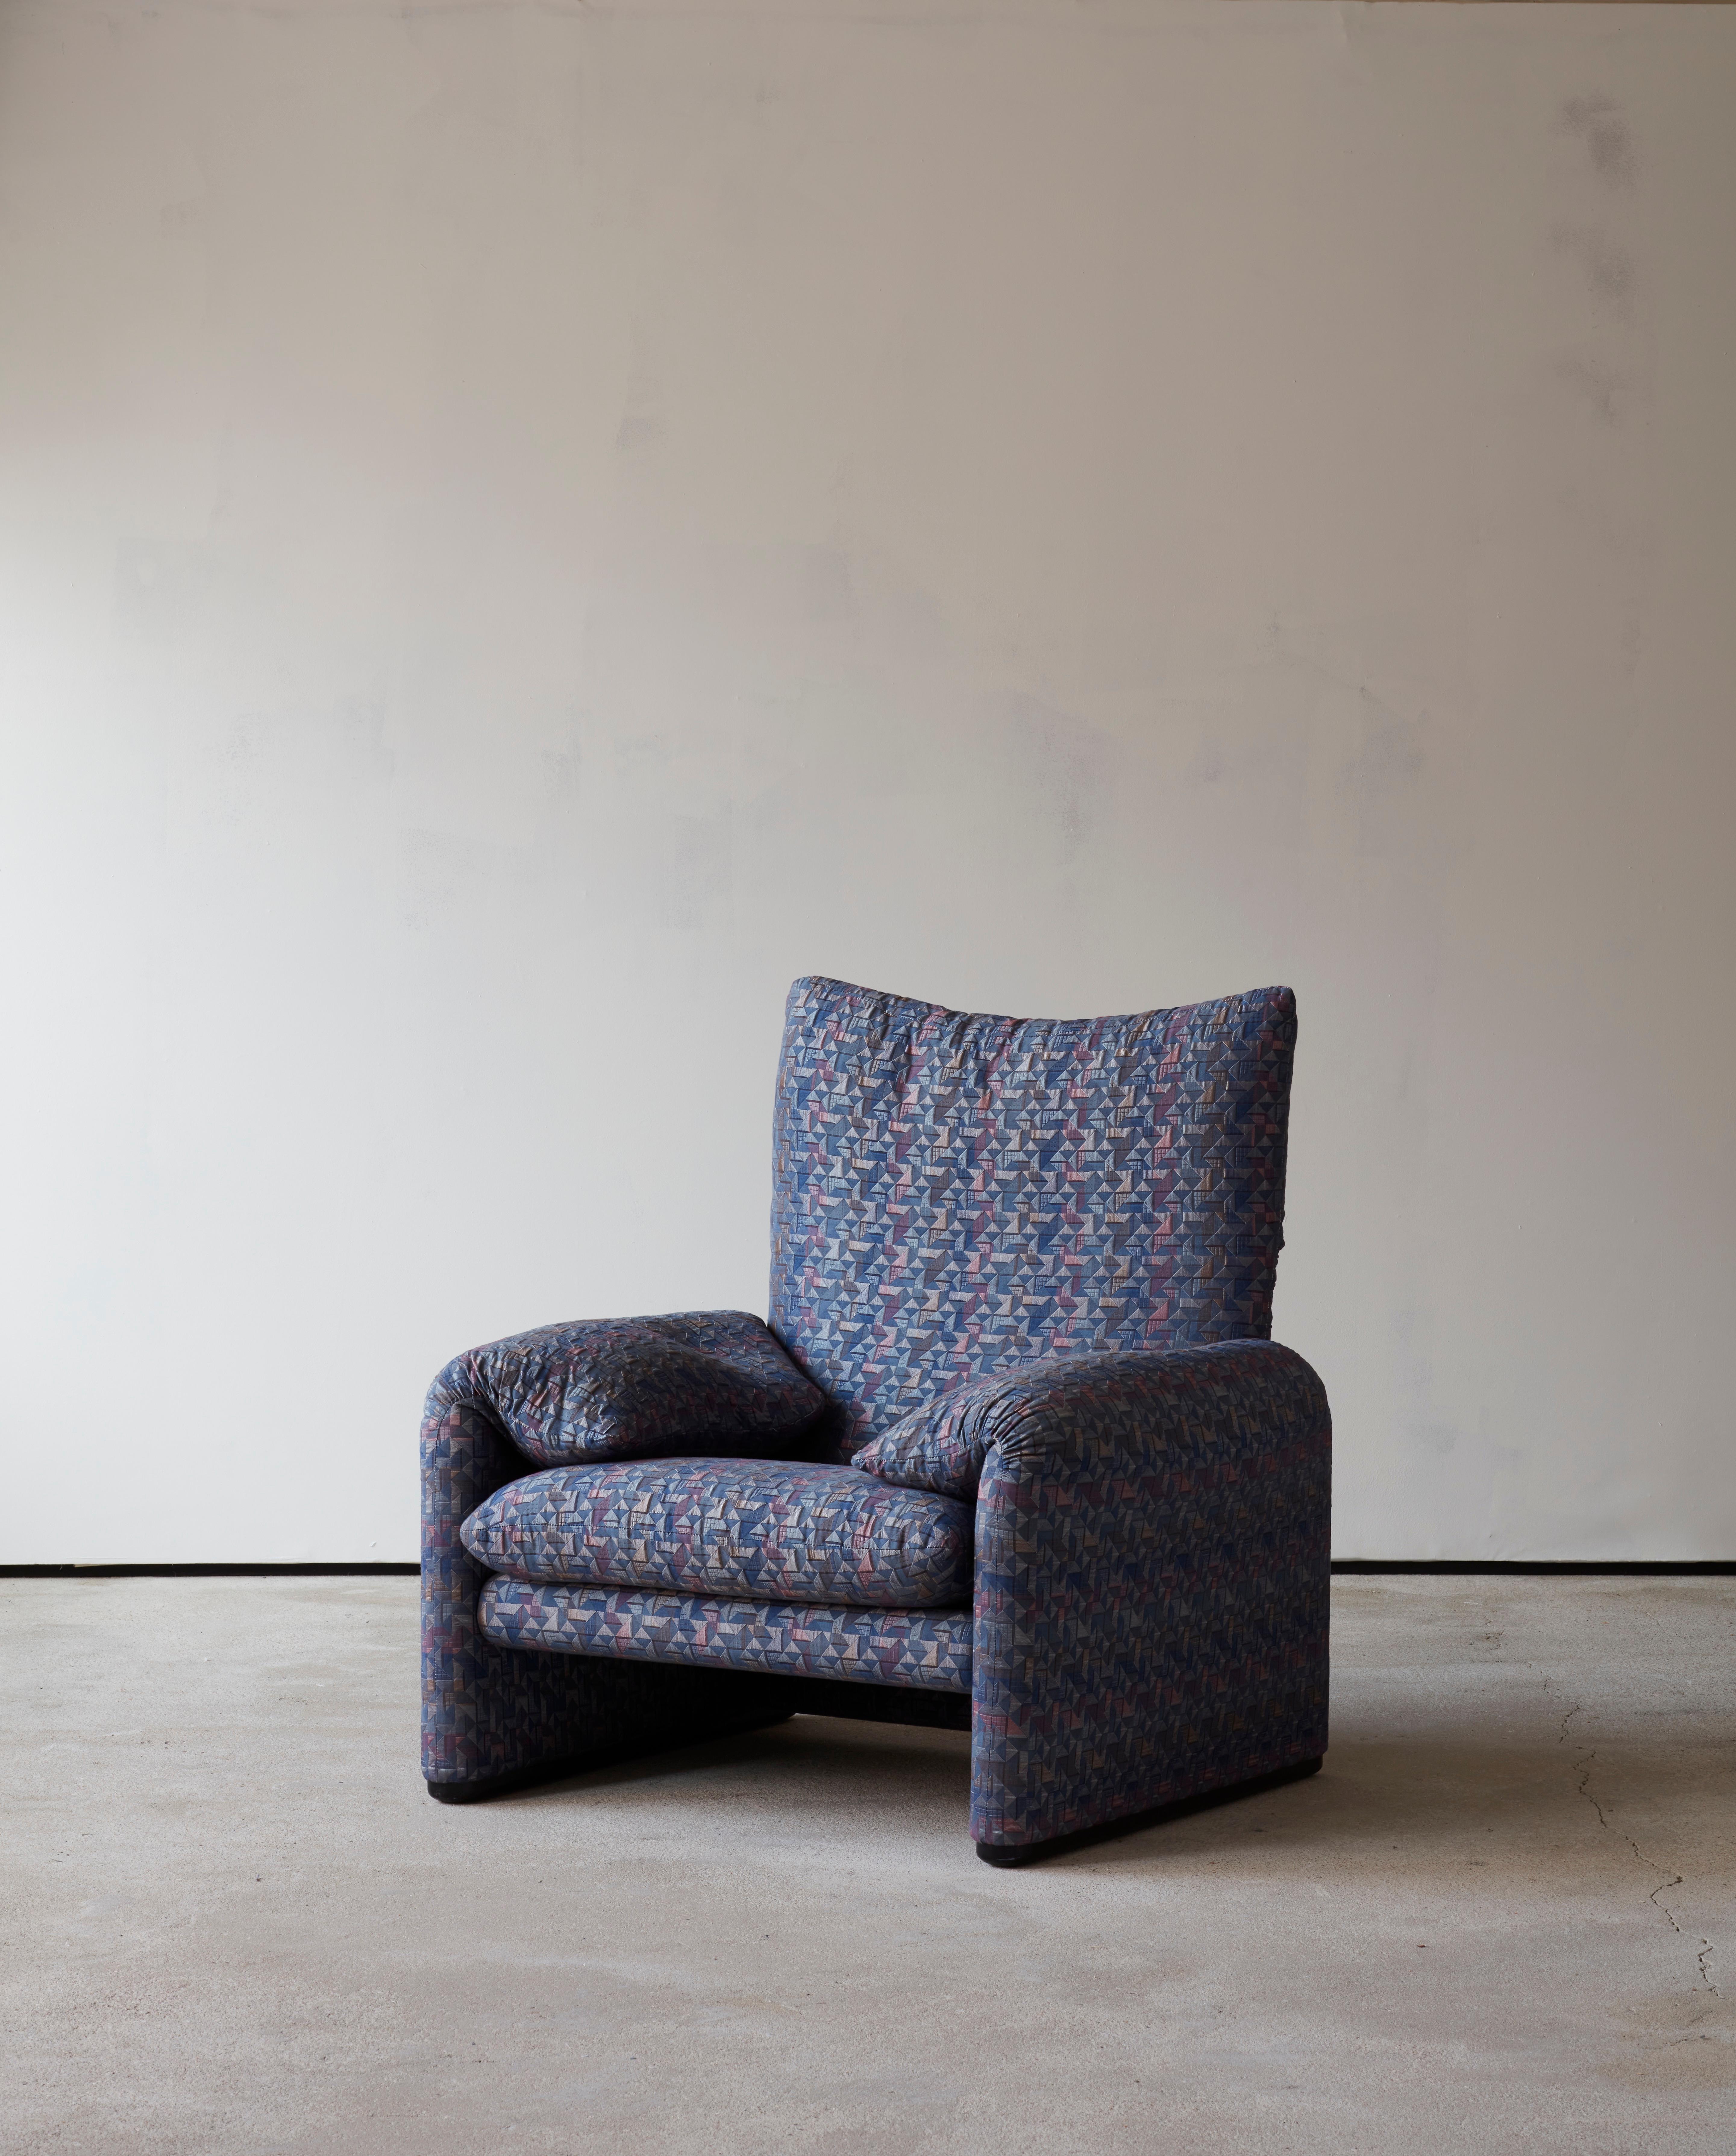 The Maralunga armchair by Vico Magistretti is , in the designers words 